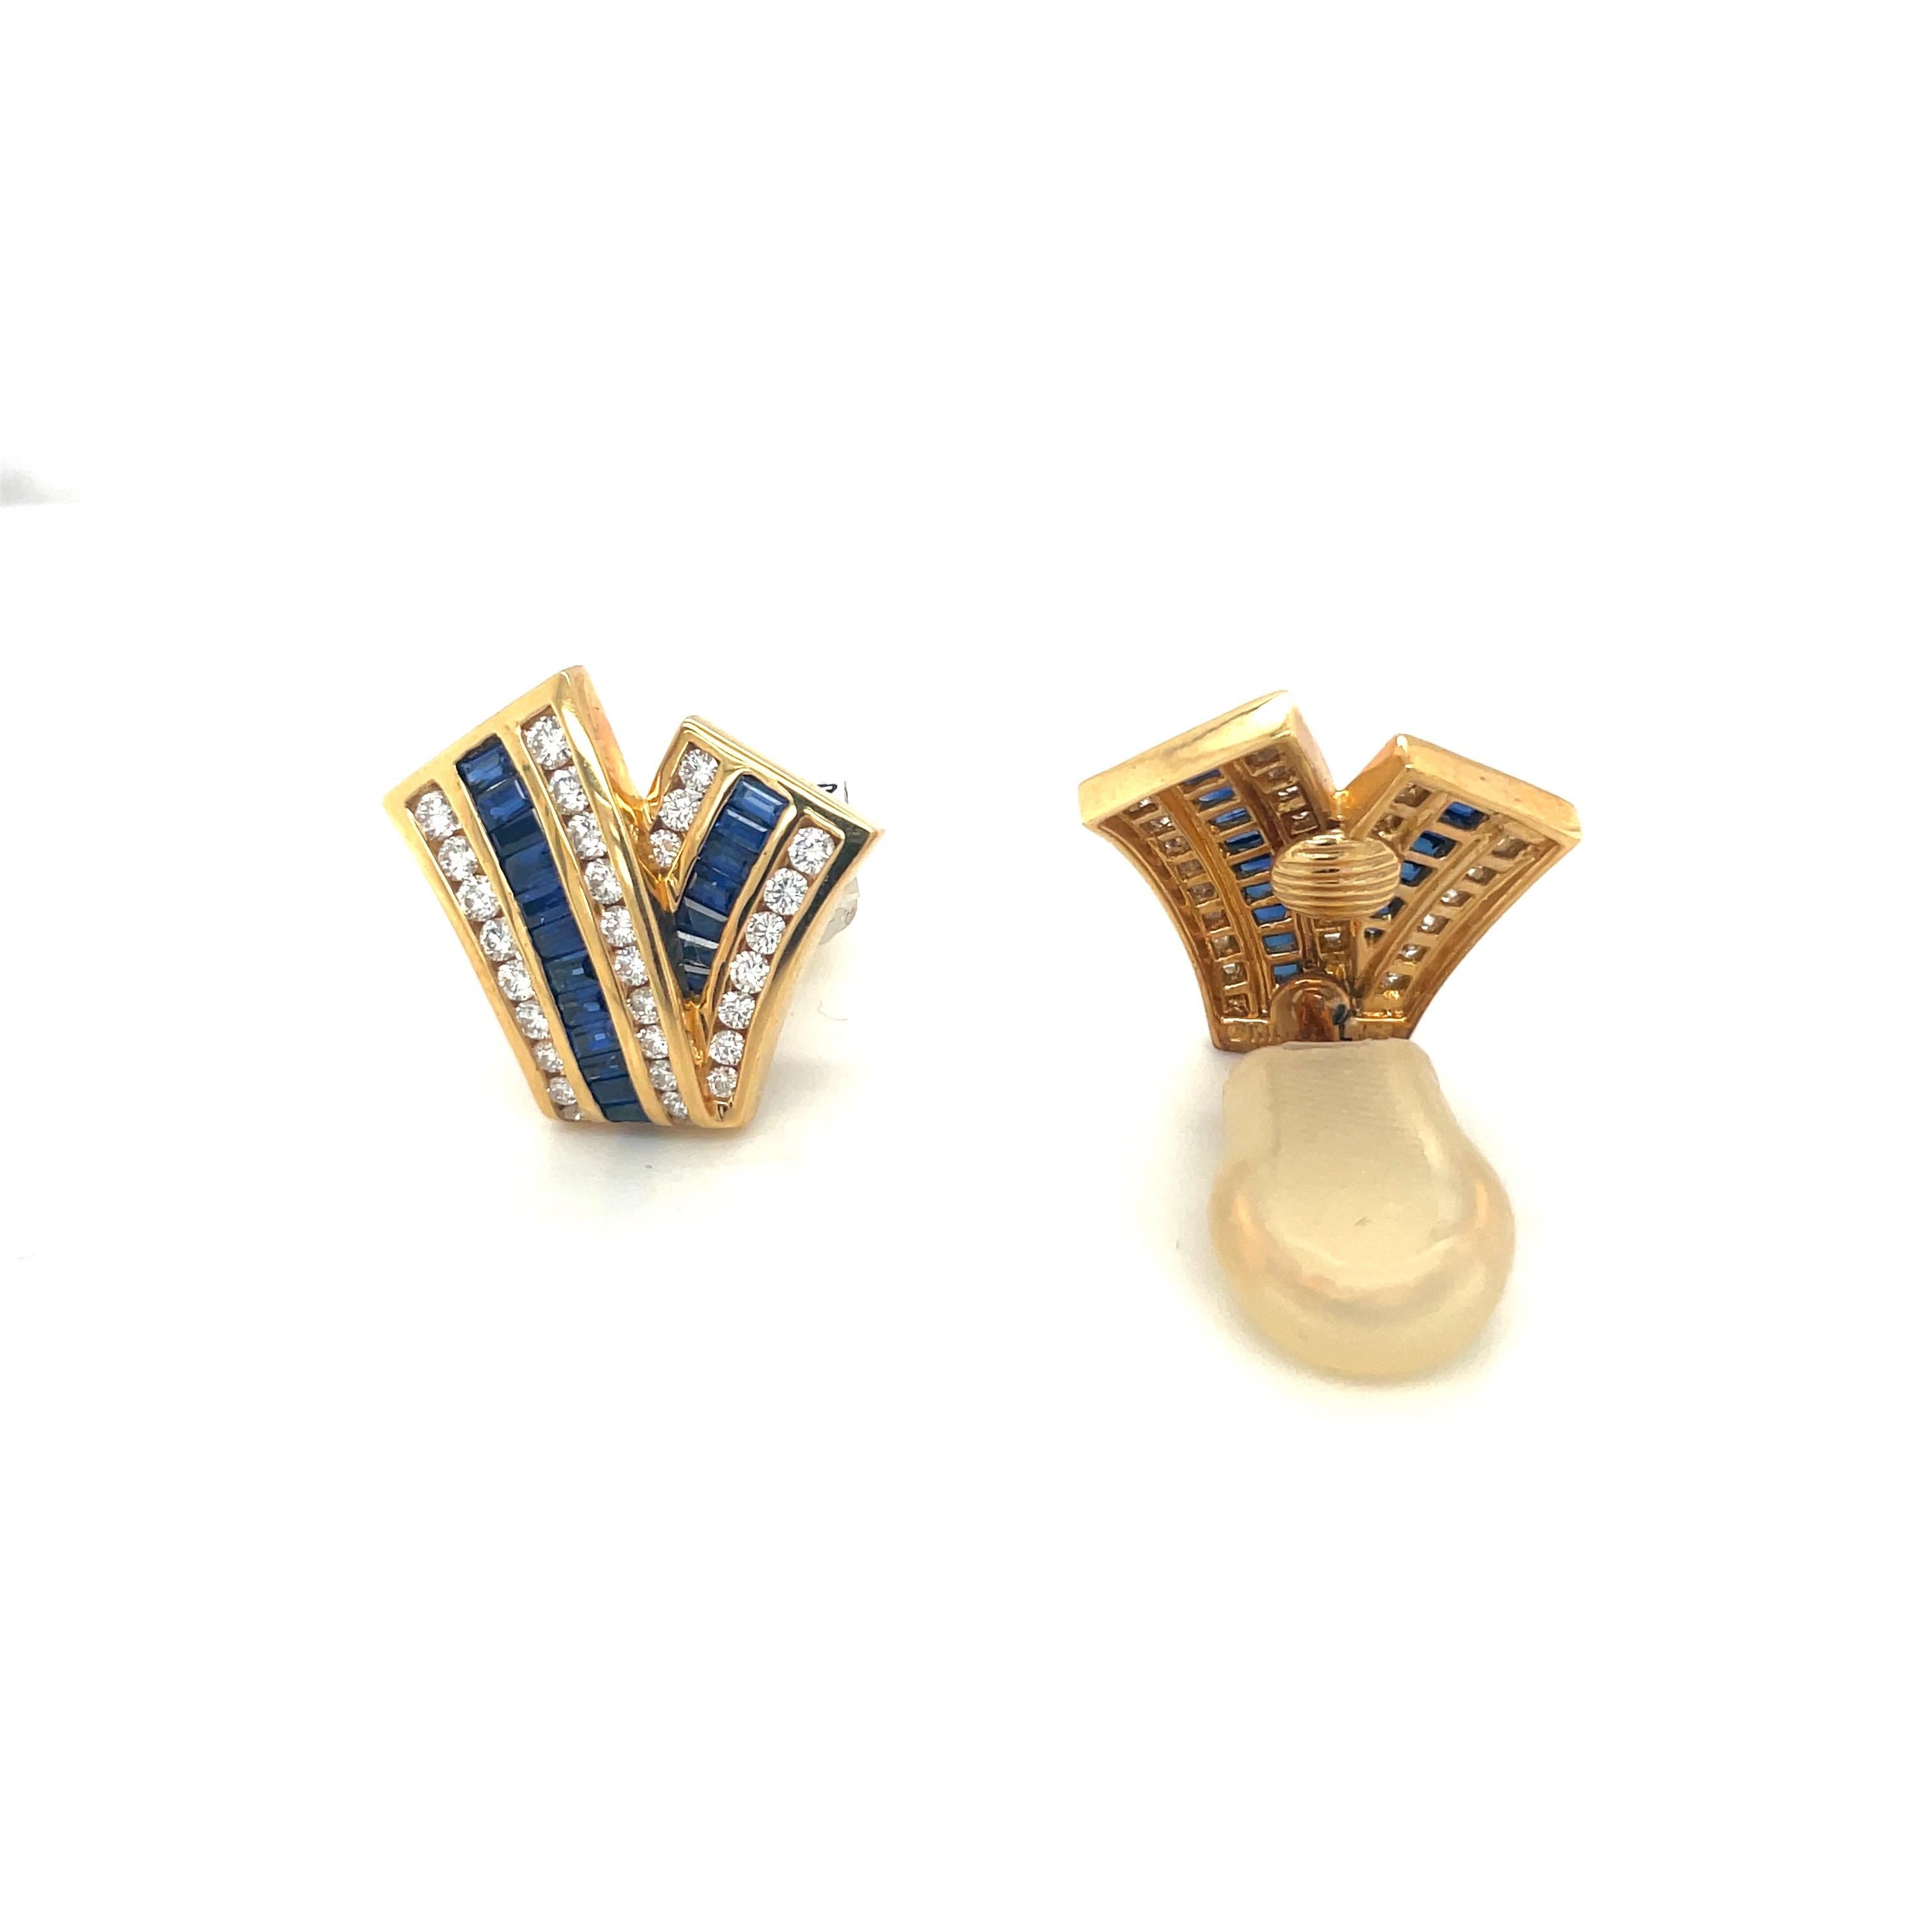 Contemporary Charles Krypell 18KT Yellow Gold 1.97Ct Blue Sapphire 1.23Ct. Diamond Earrings For Sale